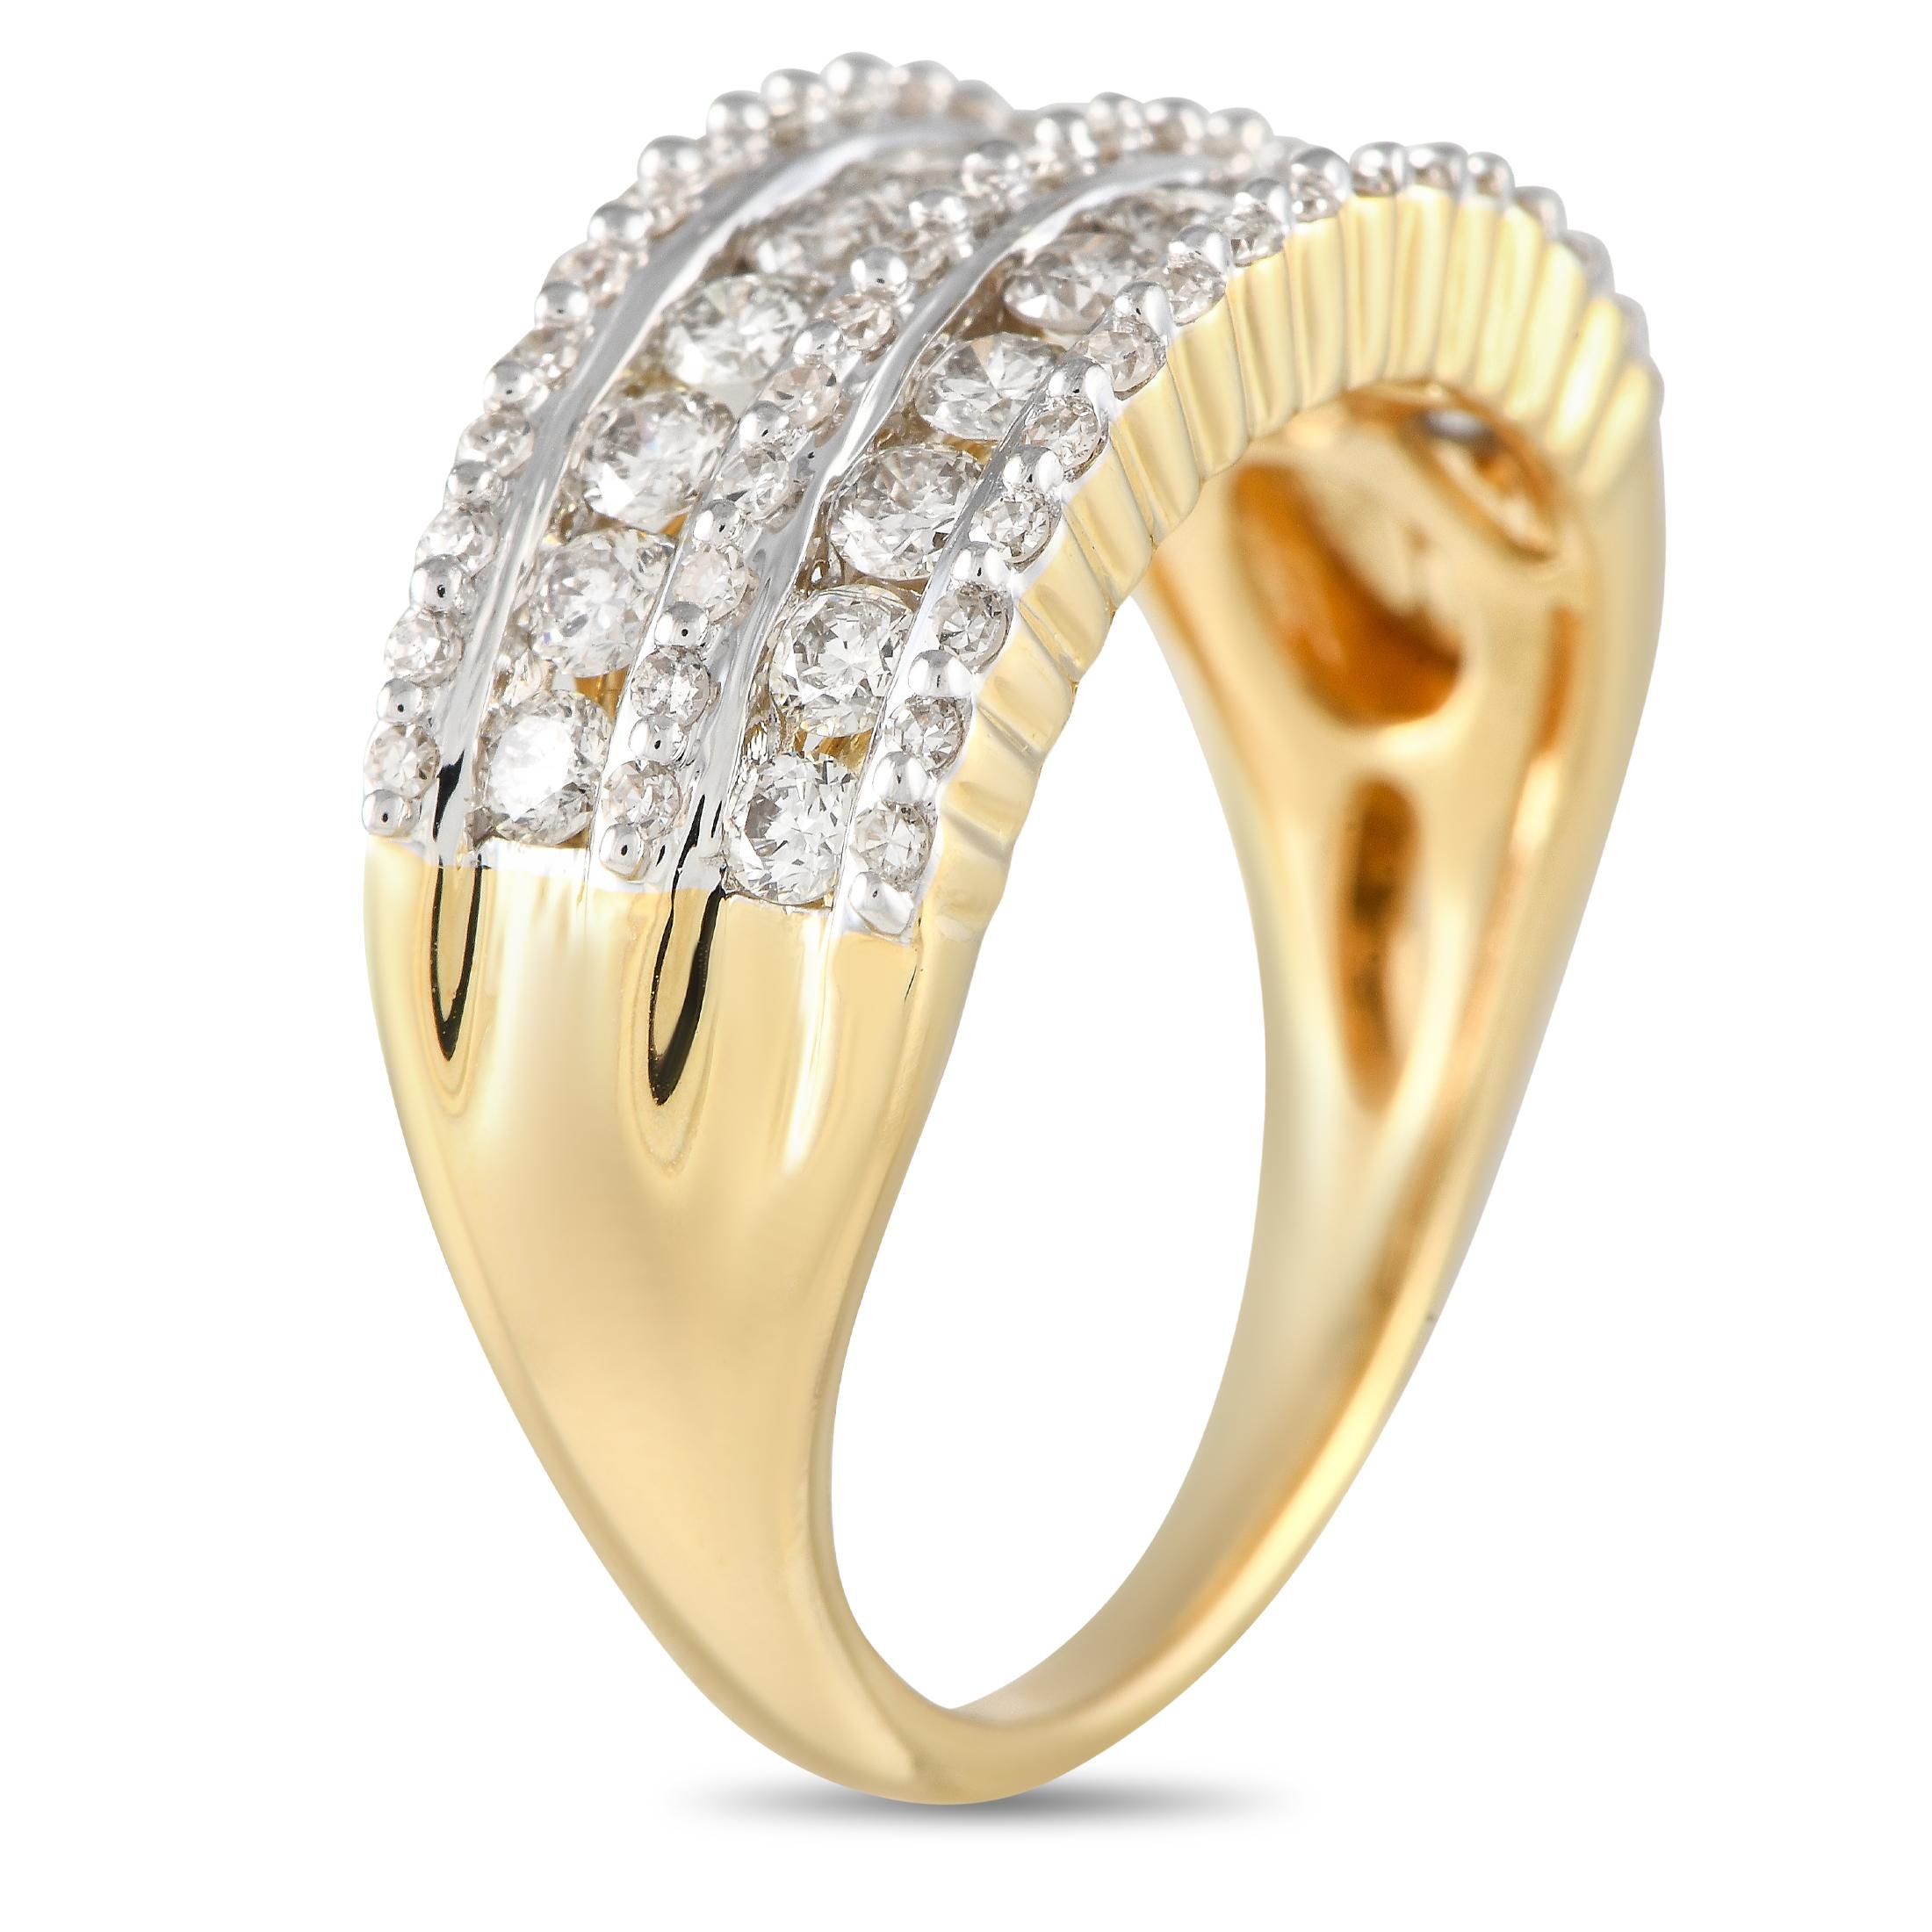 This diamond ring makes a stylish, sophisticated, and sturdy option for someone who leads an active lifestyle. Best for those who do a lot of work with their hands, this 14K yellow gold ring features a 3mm band with two rows of flush-set diamonds in